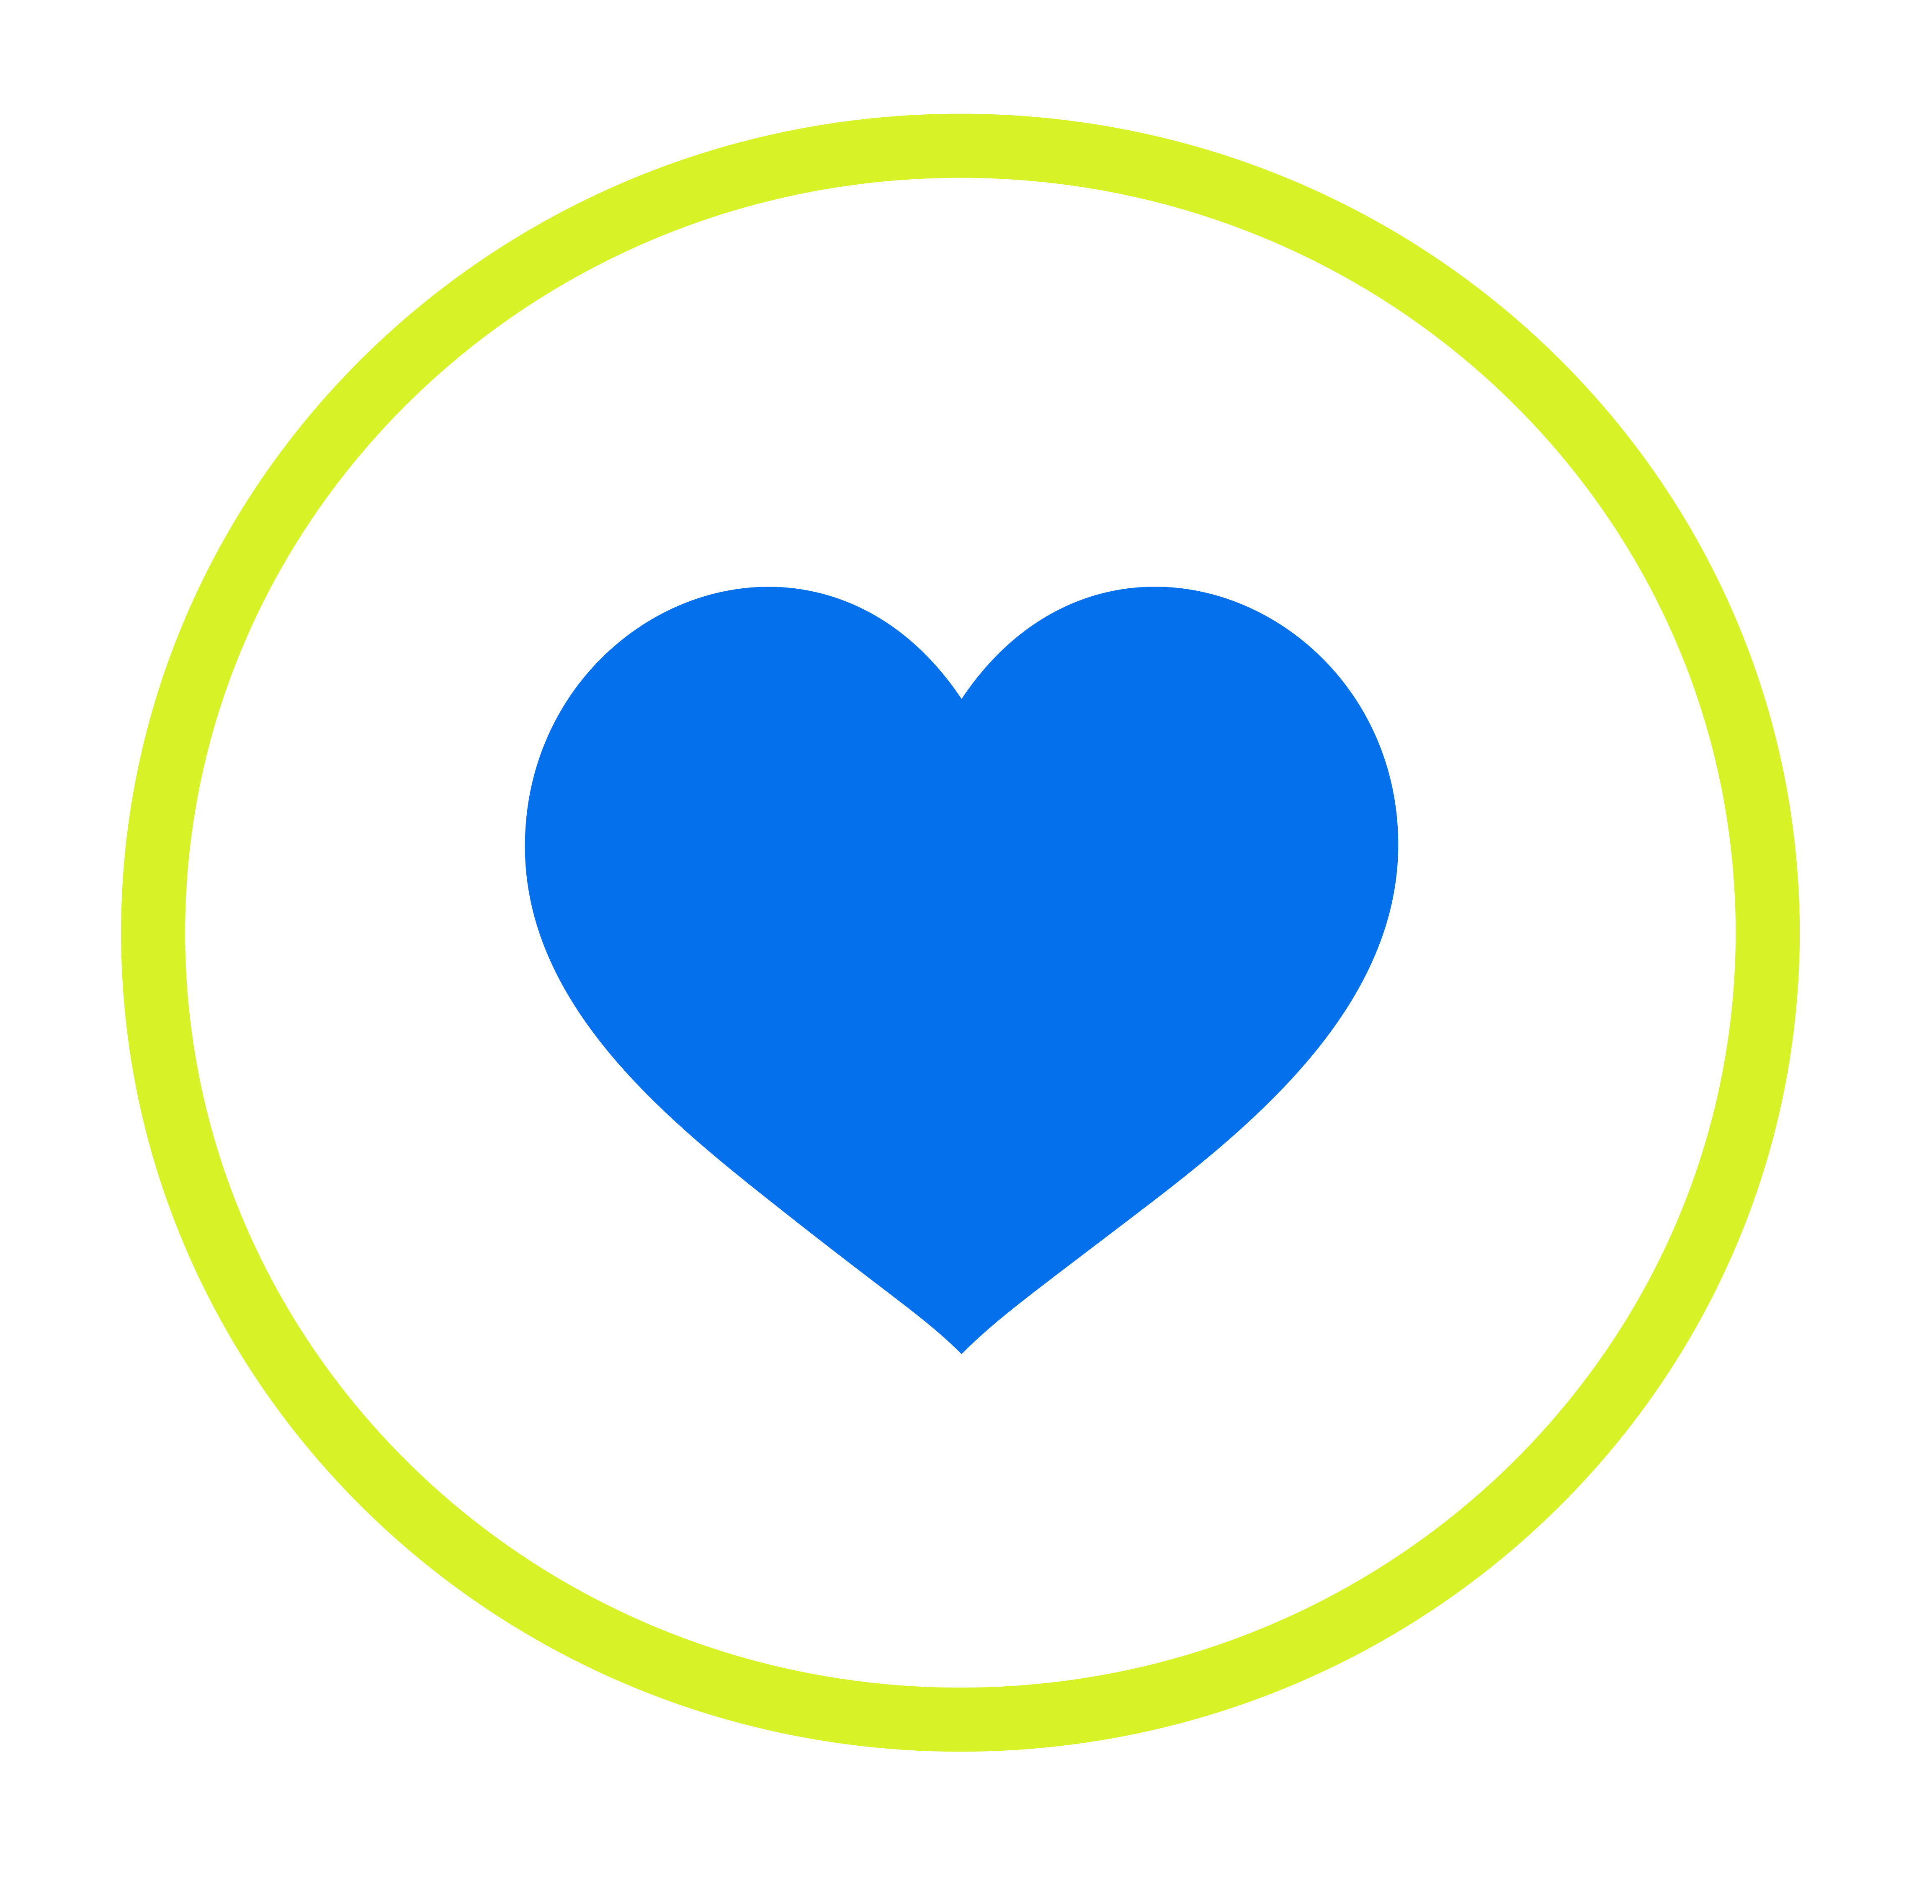 icon shape of a blue heart in a green circle